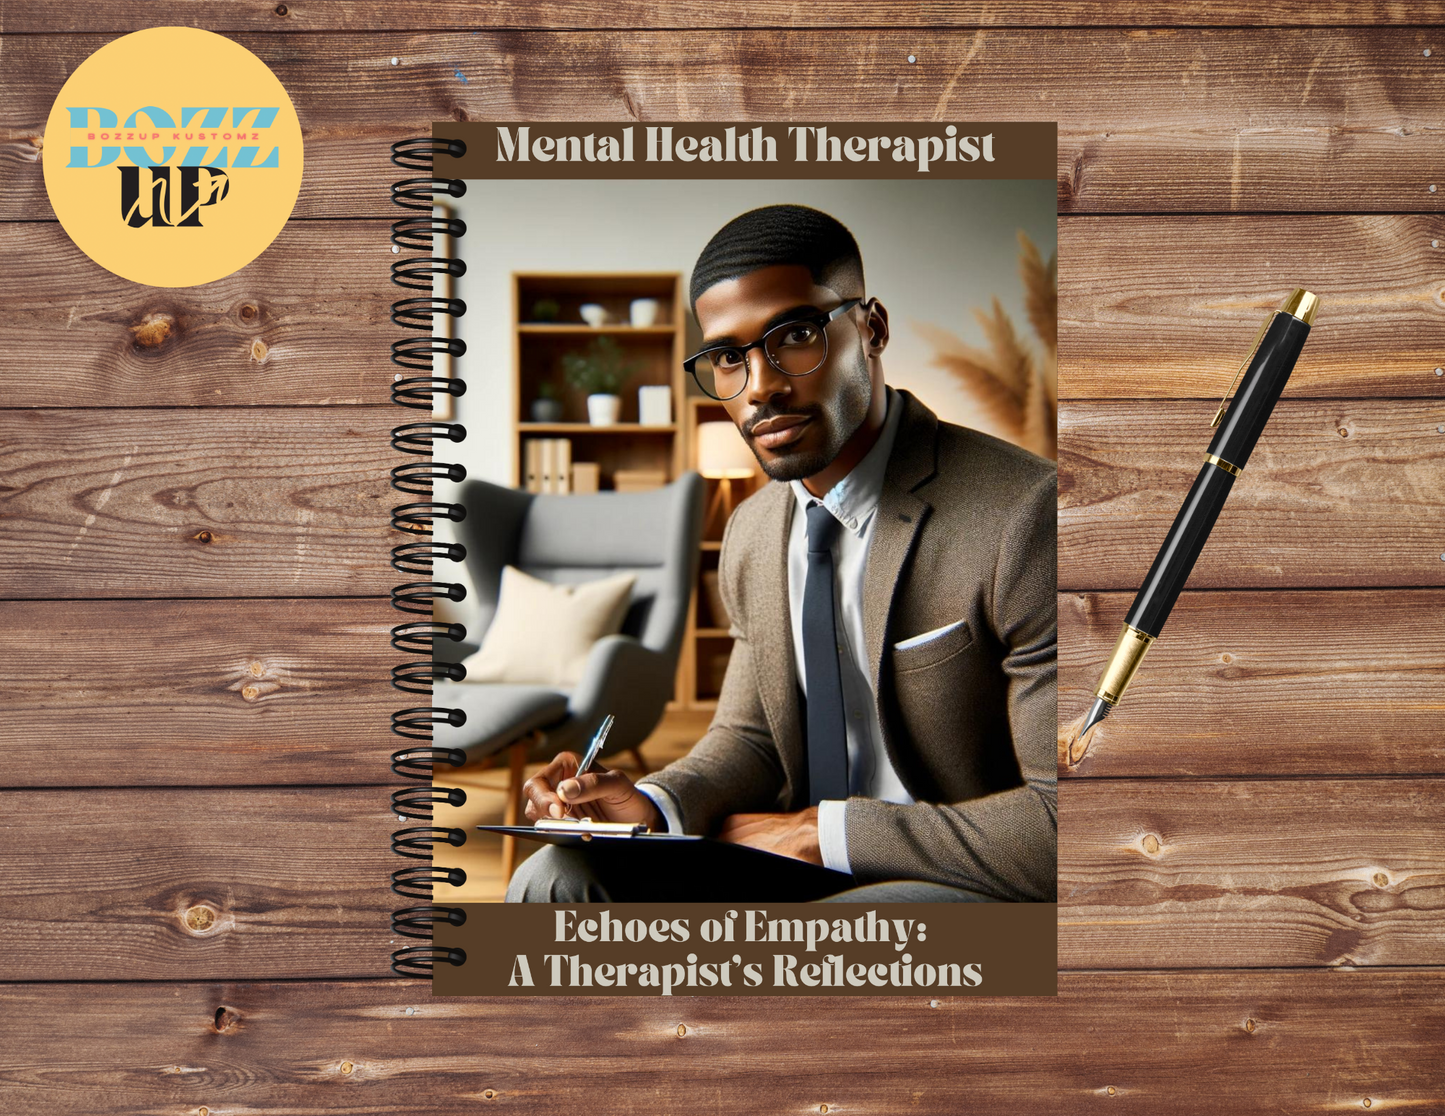 Elegant semi-hard cover of the Handcrafted Reflection Journal, featuring a subtle, textured finish for a professional and stylish appearance for Mental Health professional therapist